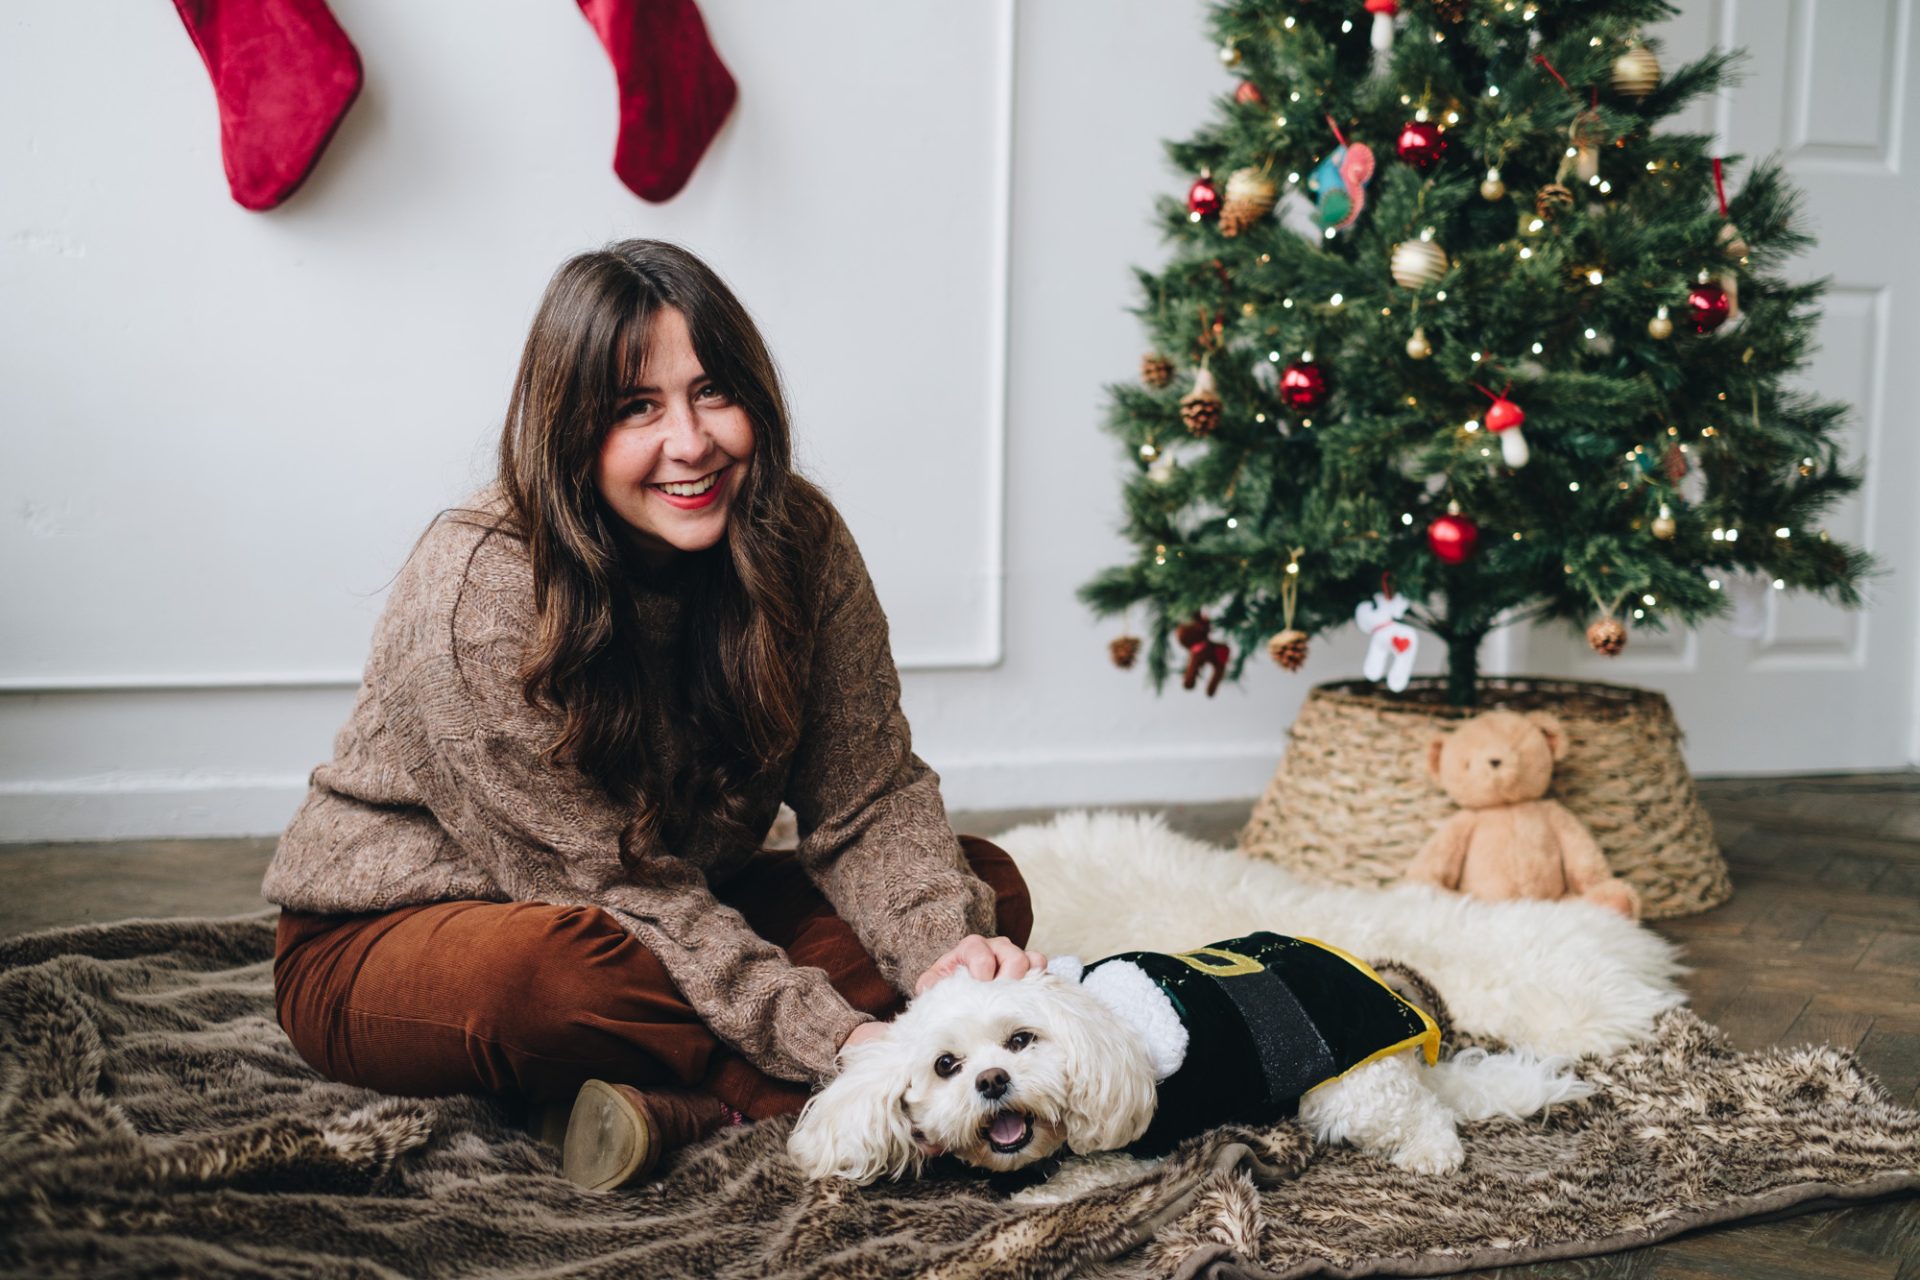 Woman and dog sat by a Christmas tree